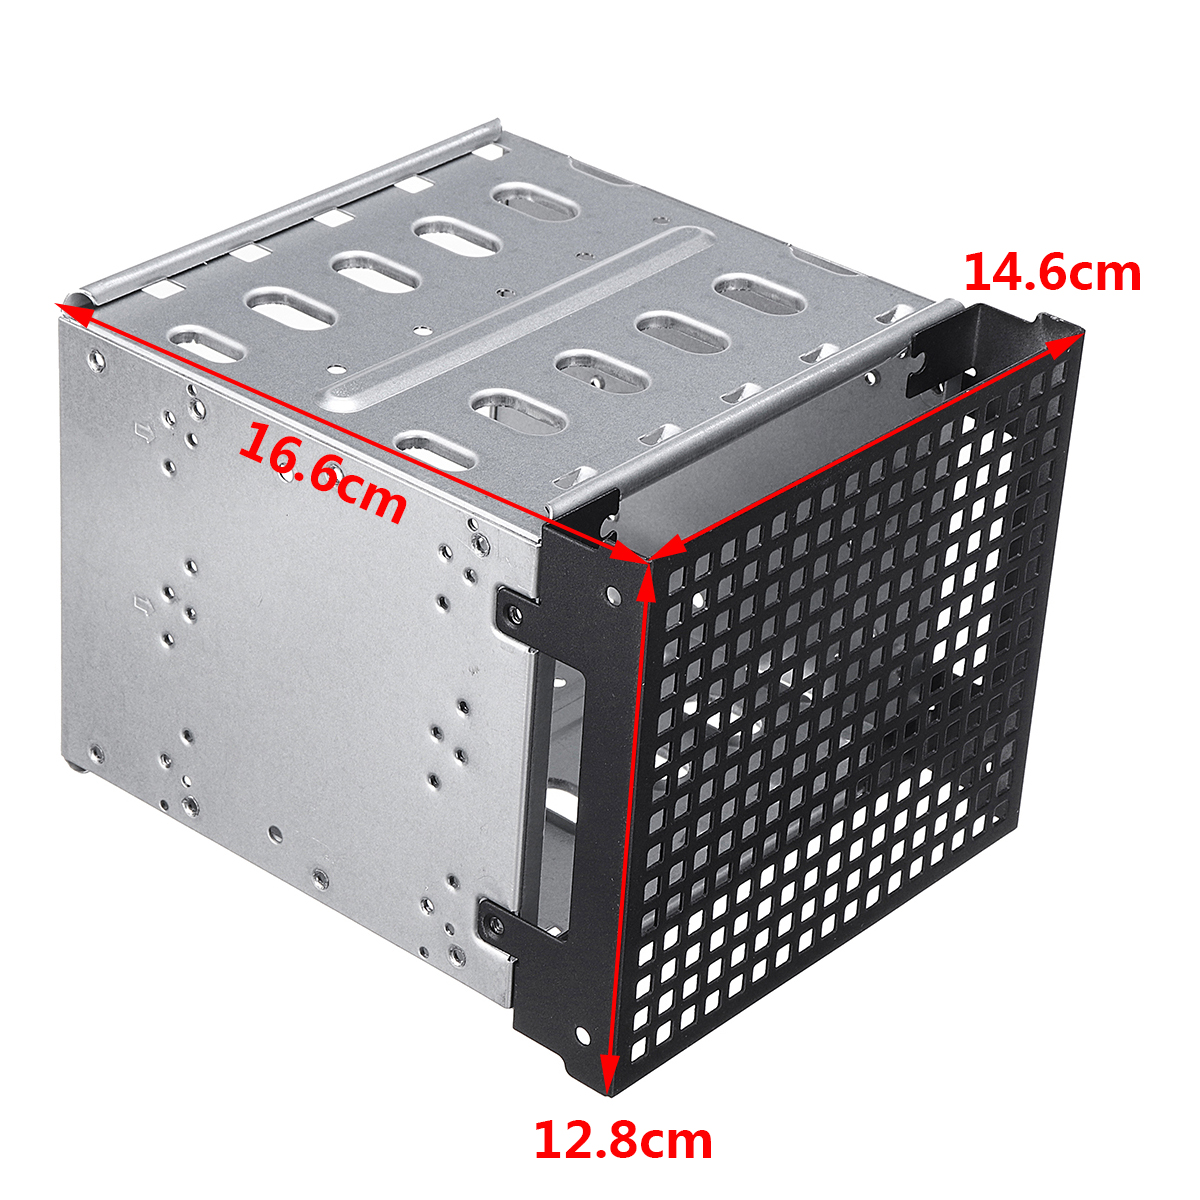 5.25" to 5x 3.5" SATA SAS HDD Cage Rack Hard Drive Tray Caddy Converter with Fan Space 59